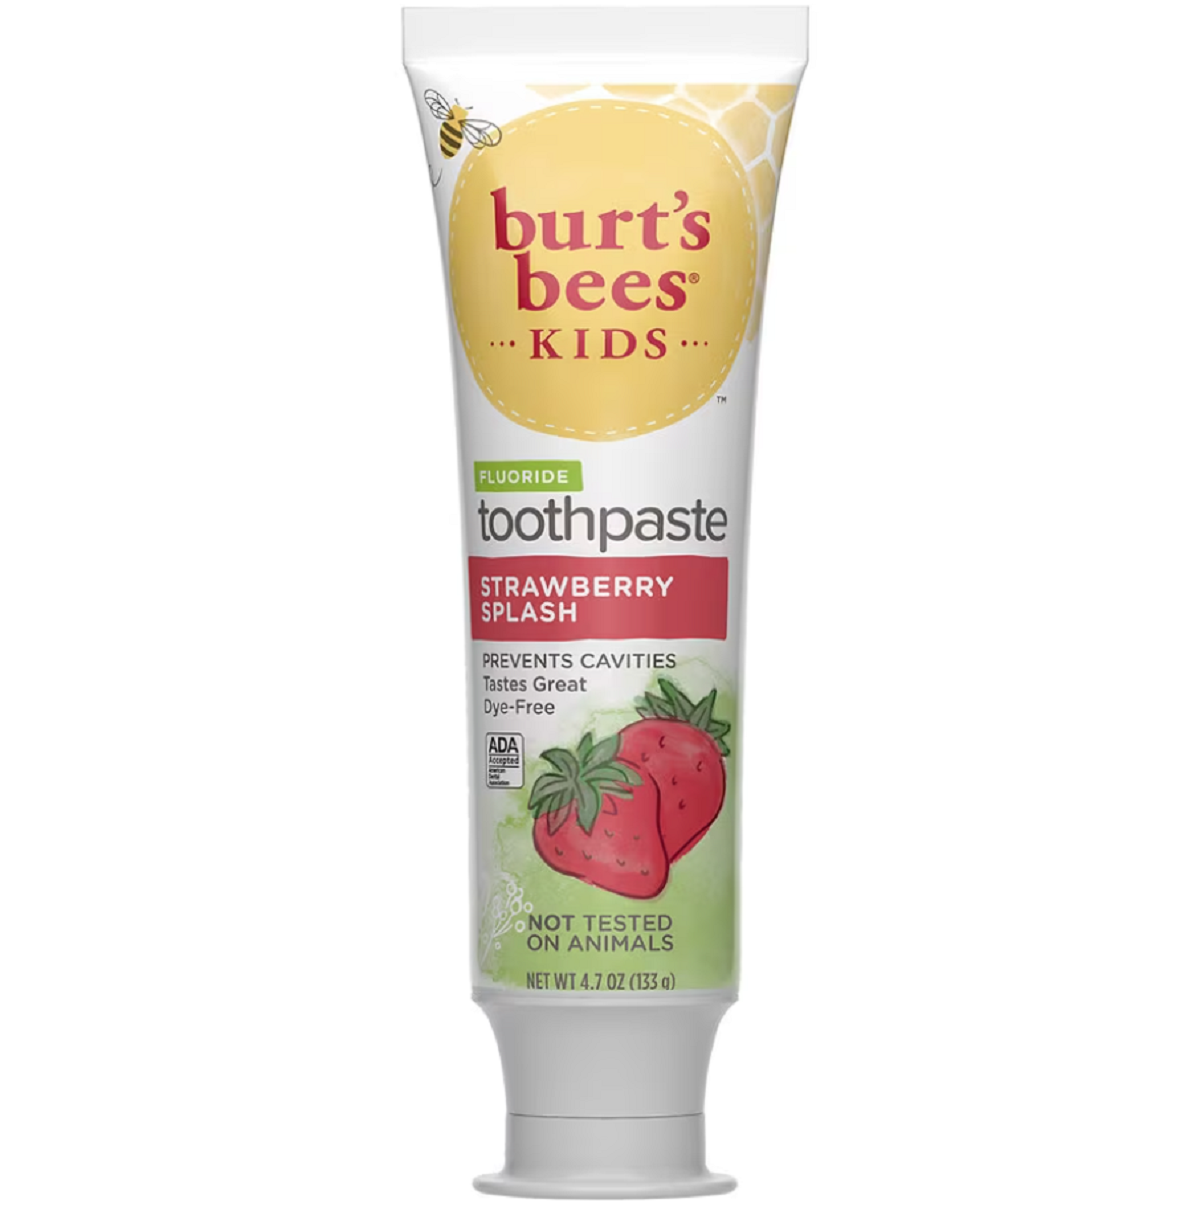 $2 Off (1) Burt’s Bees Adult Toothpaste Printable Coupon